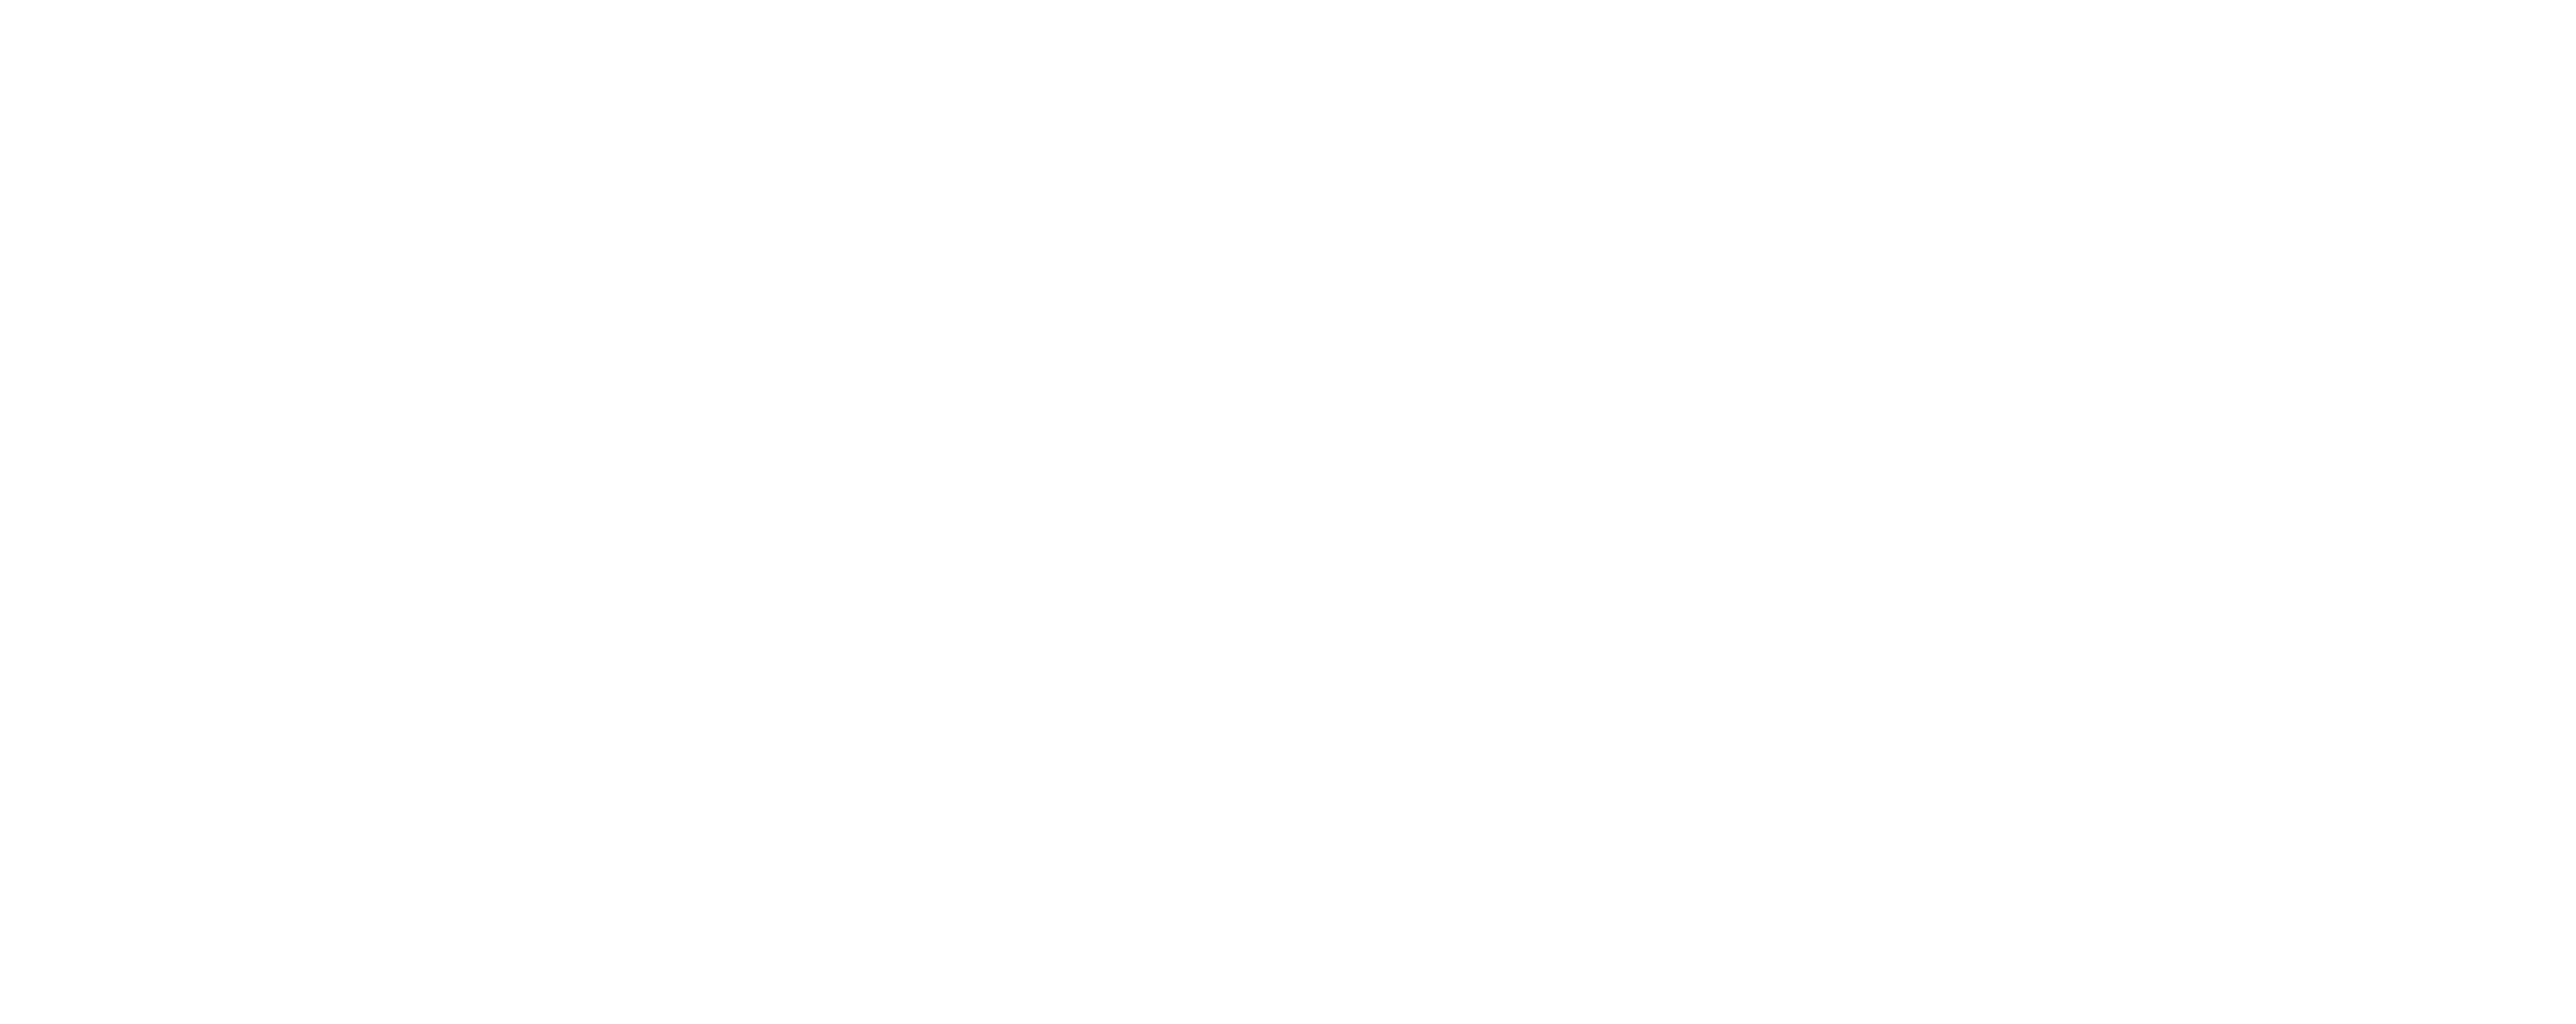 ControlTower_logo-neg.png